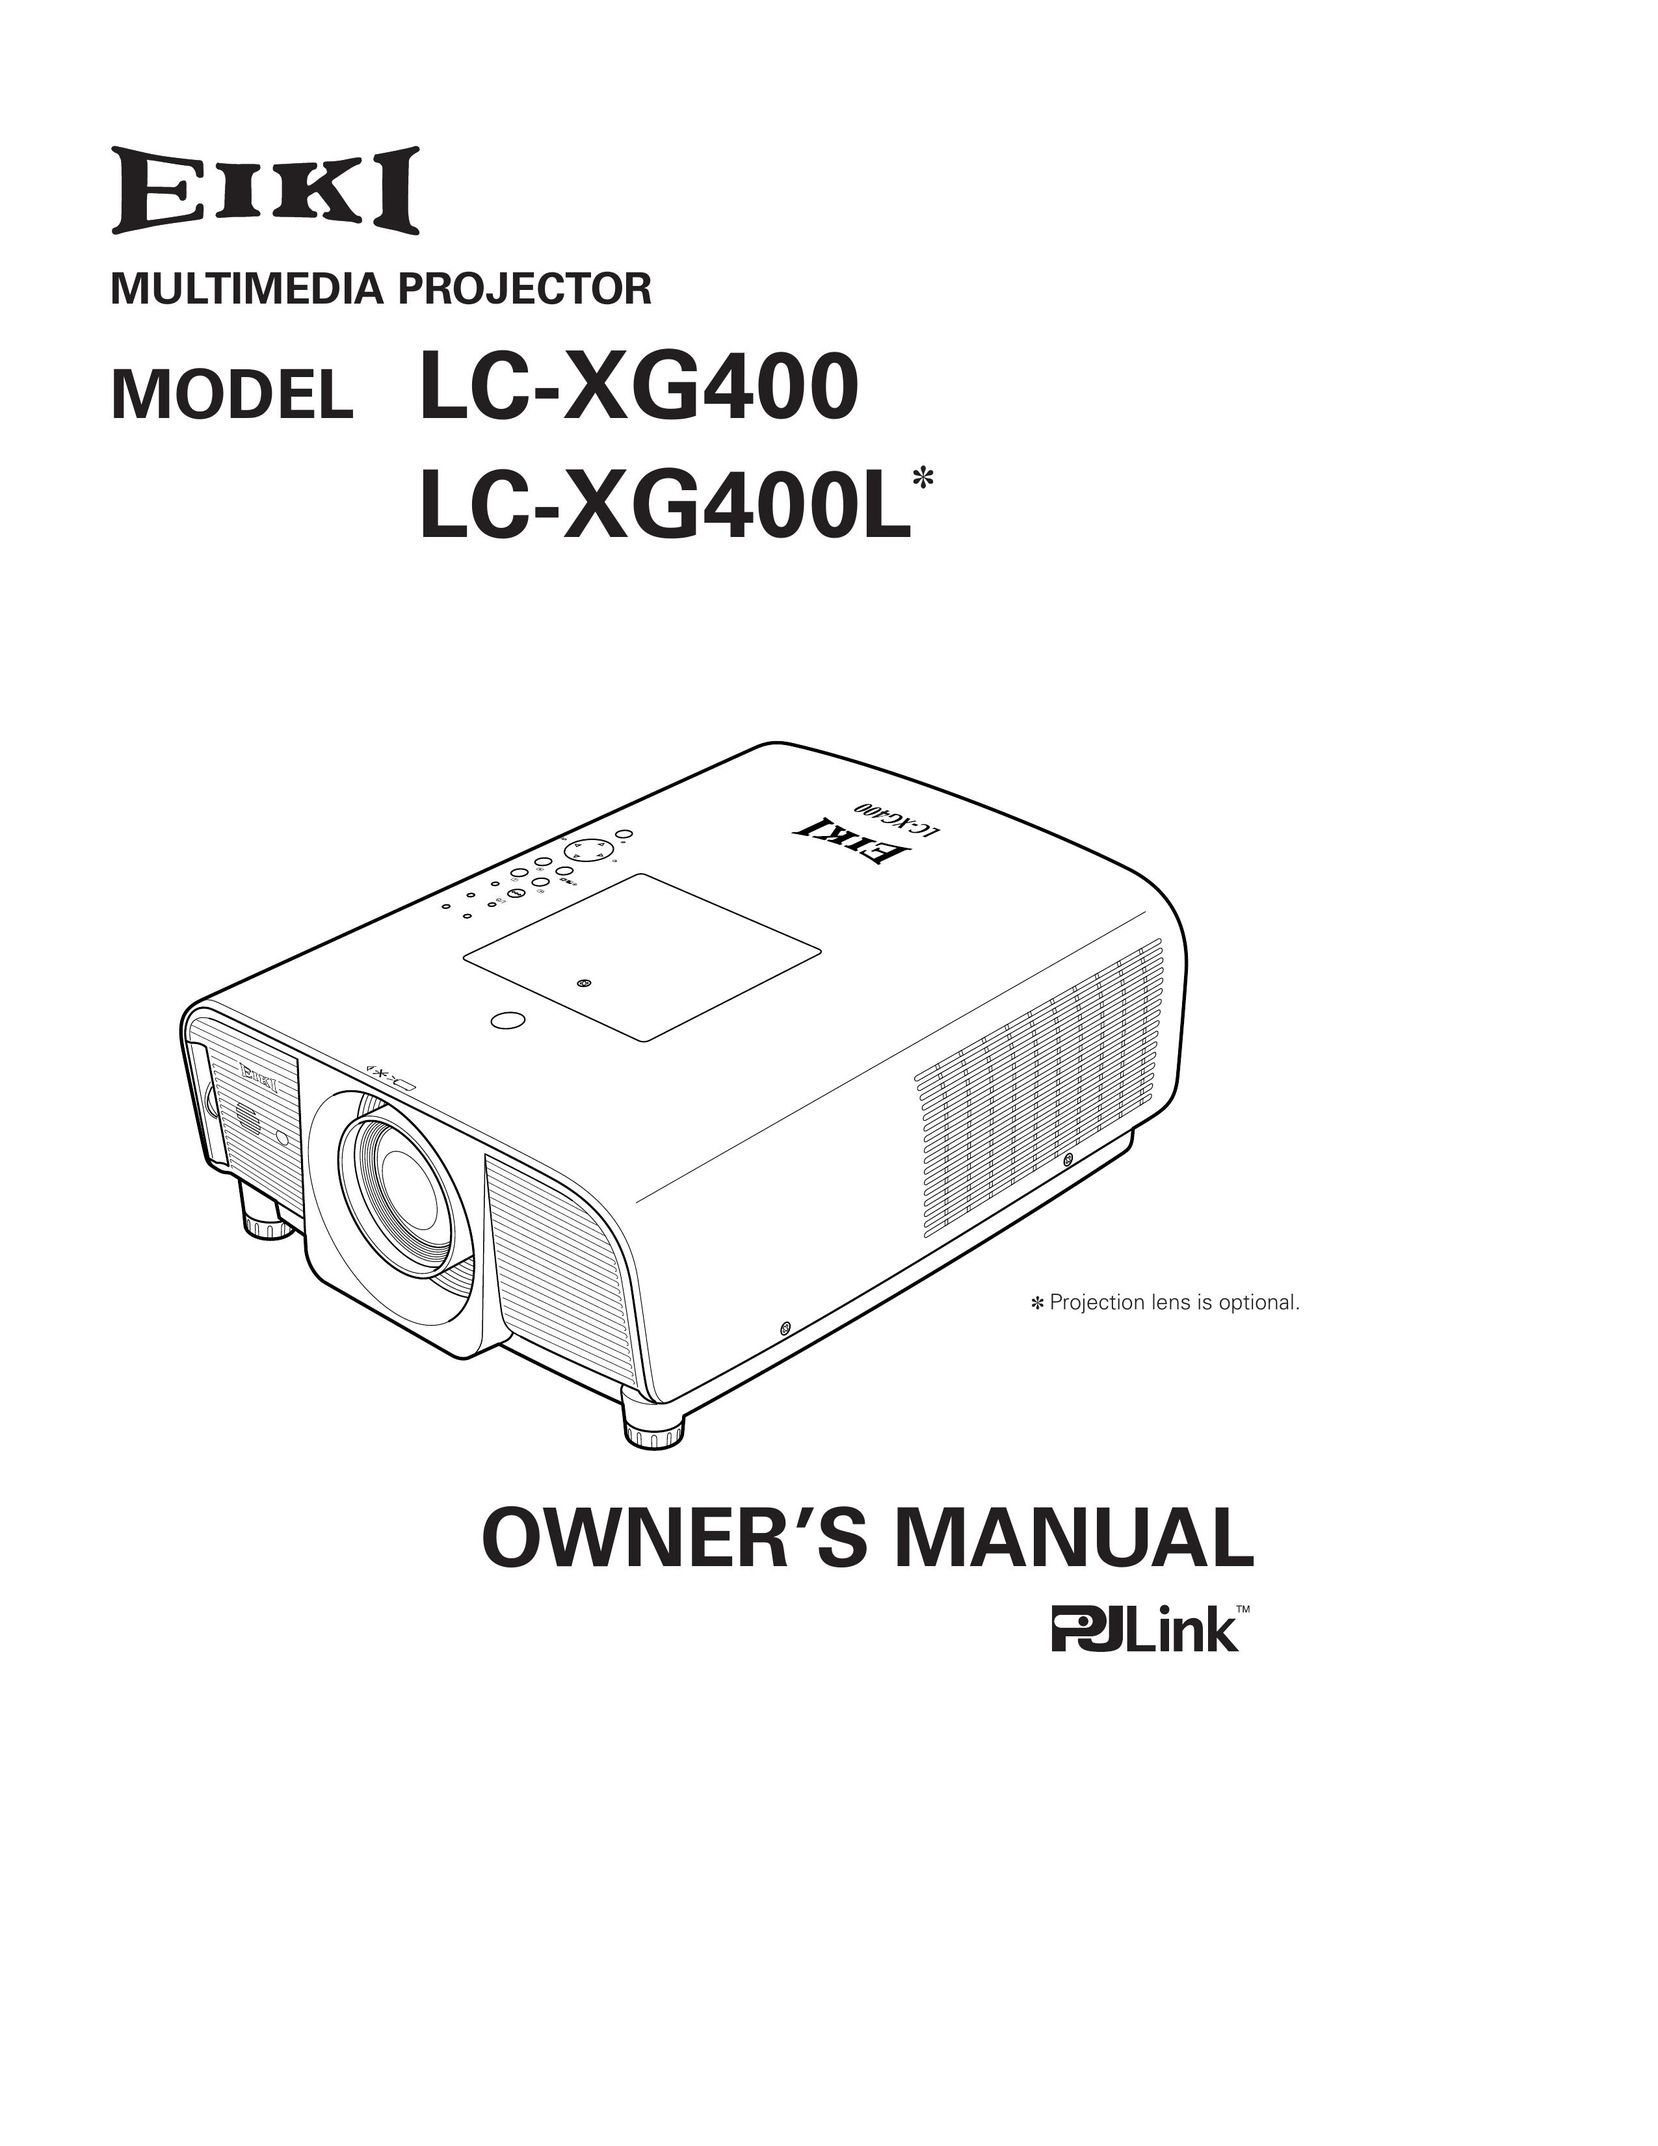 Eiki LC-XG400L Projection Television User Manual